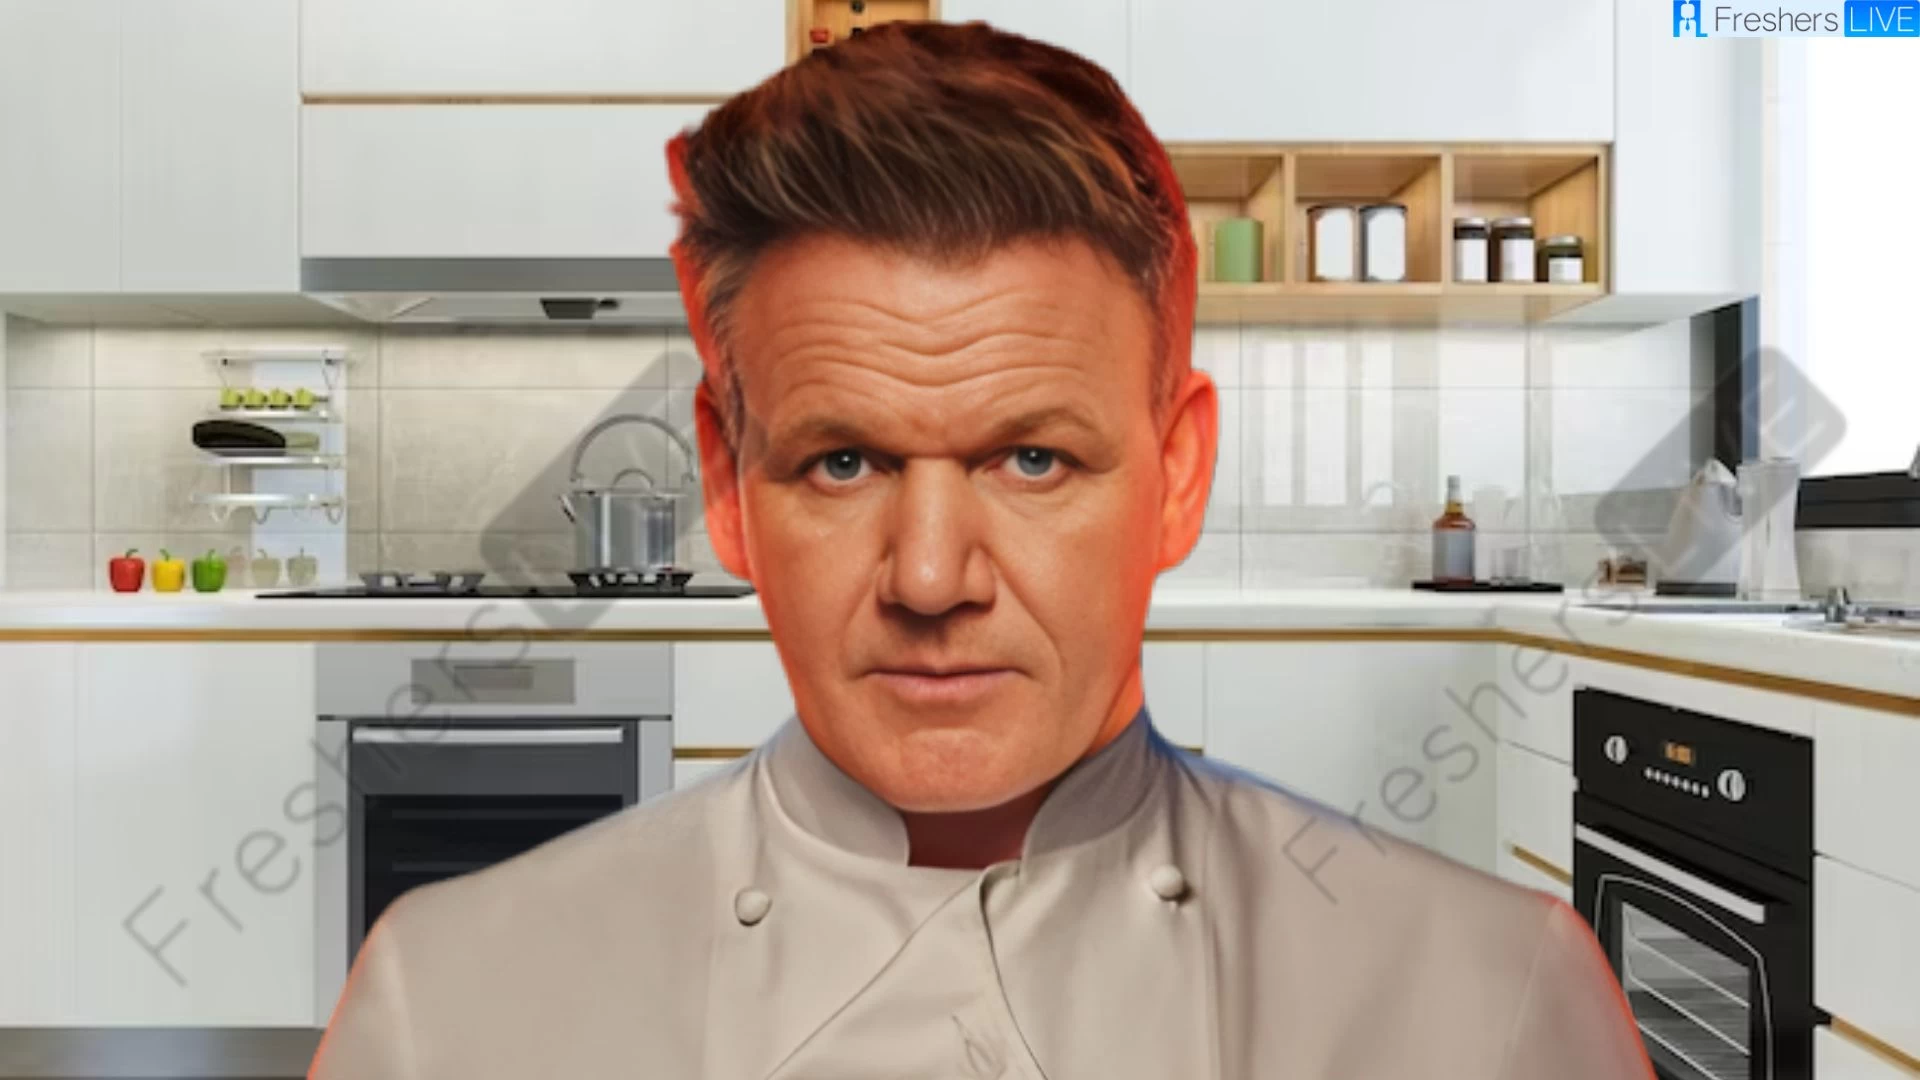 Hells Kitchen Season 22 Episode 2 Release Date and Time, Countdown, When is it Coming Out?